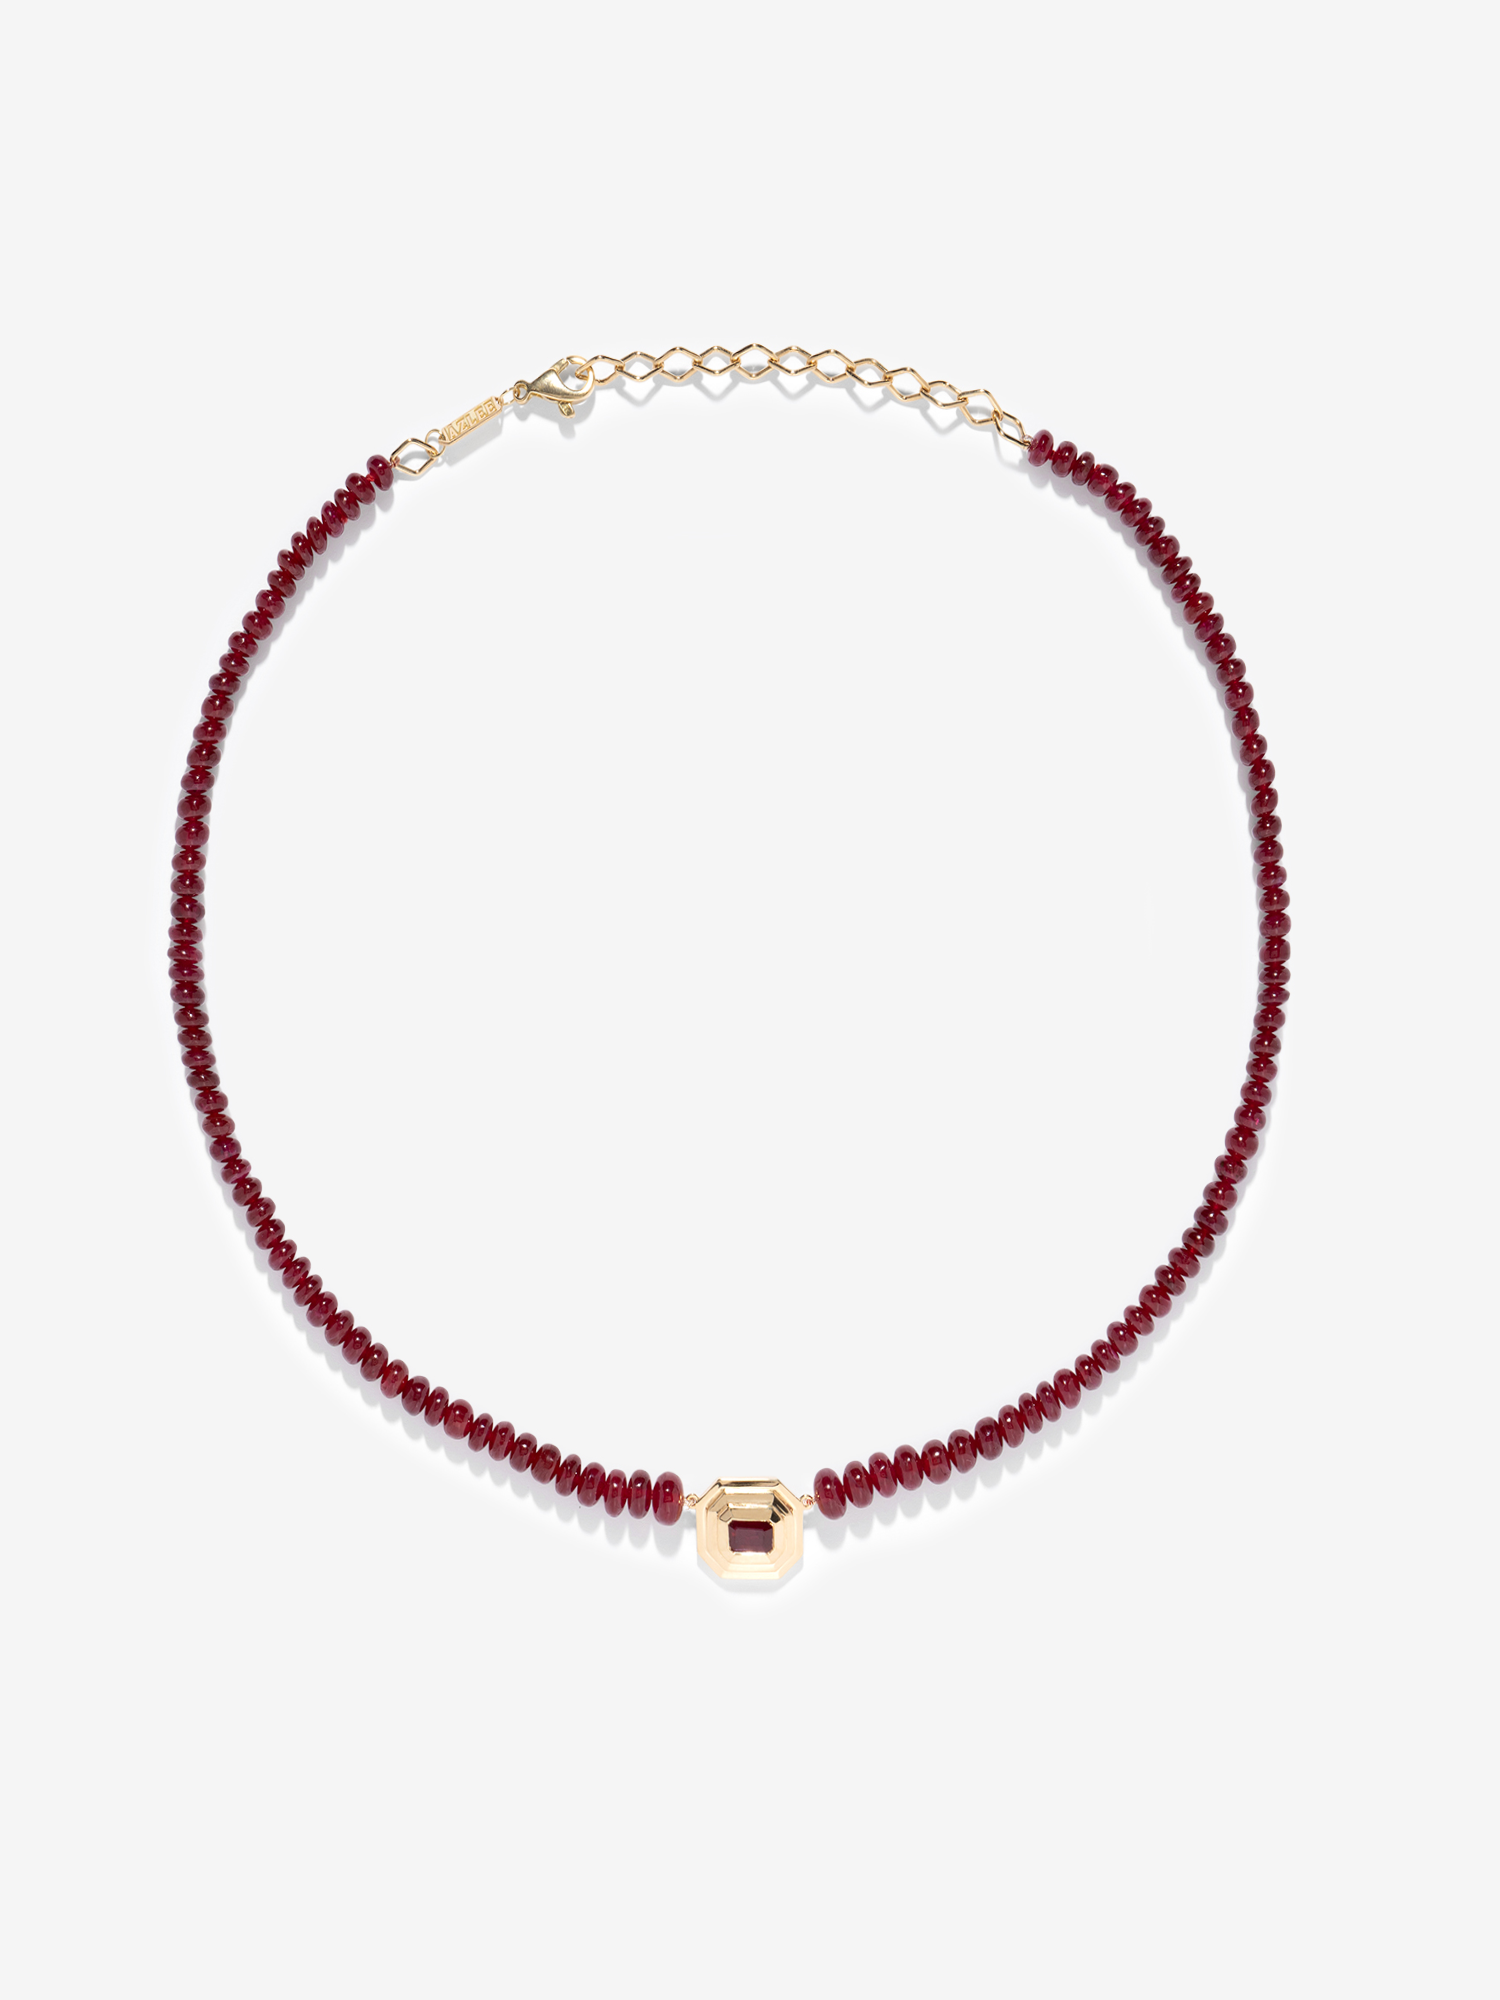 Rich Ruby Bead Staircase Necklace